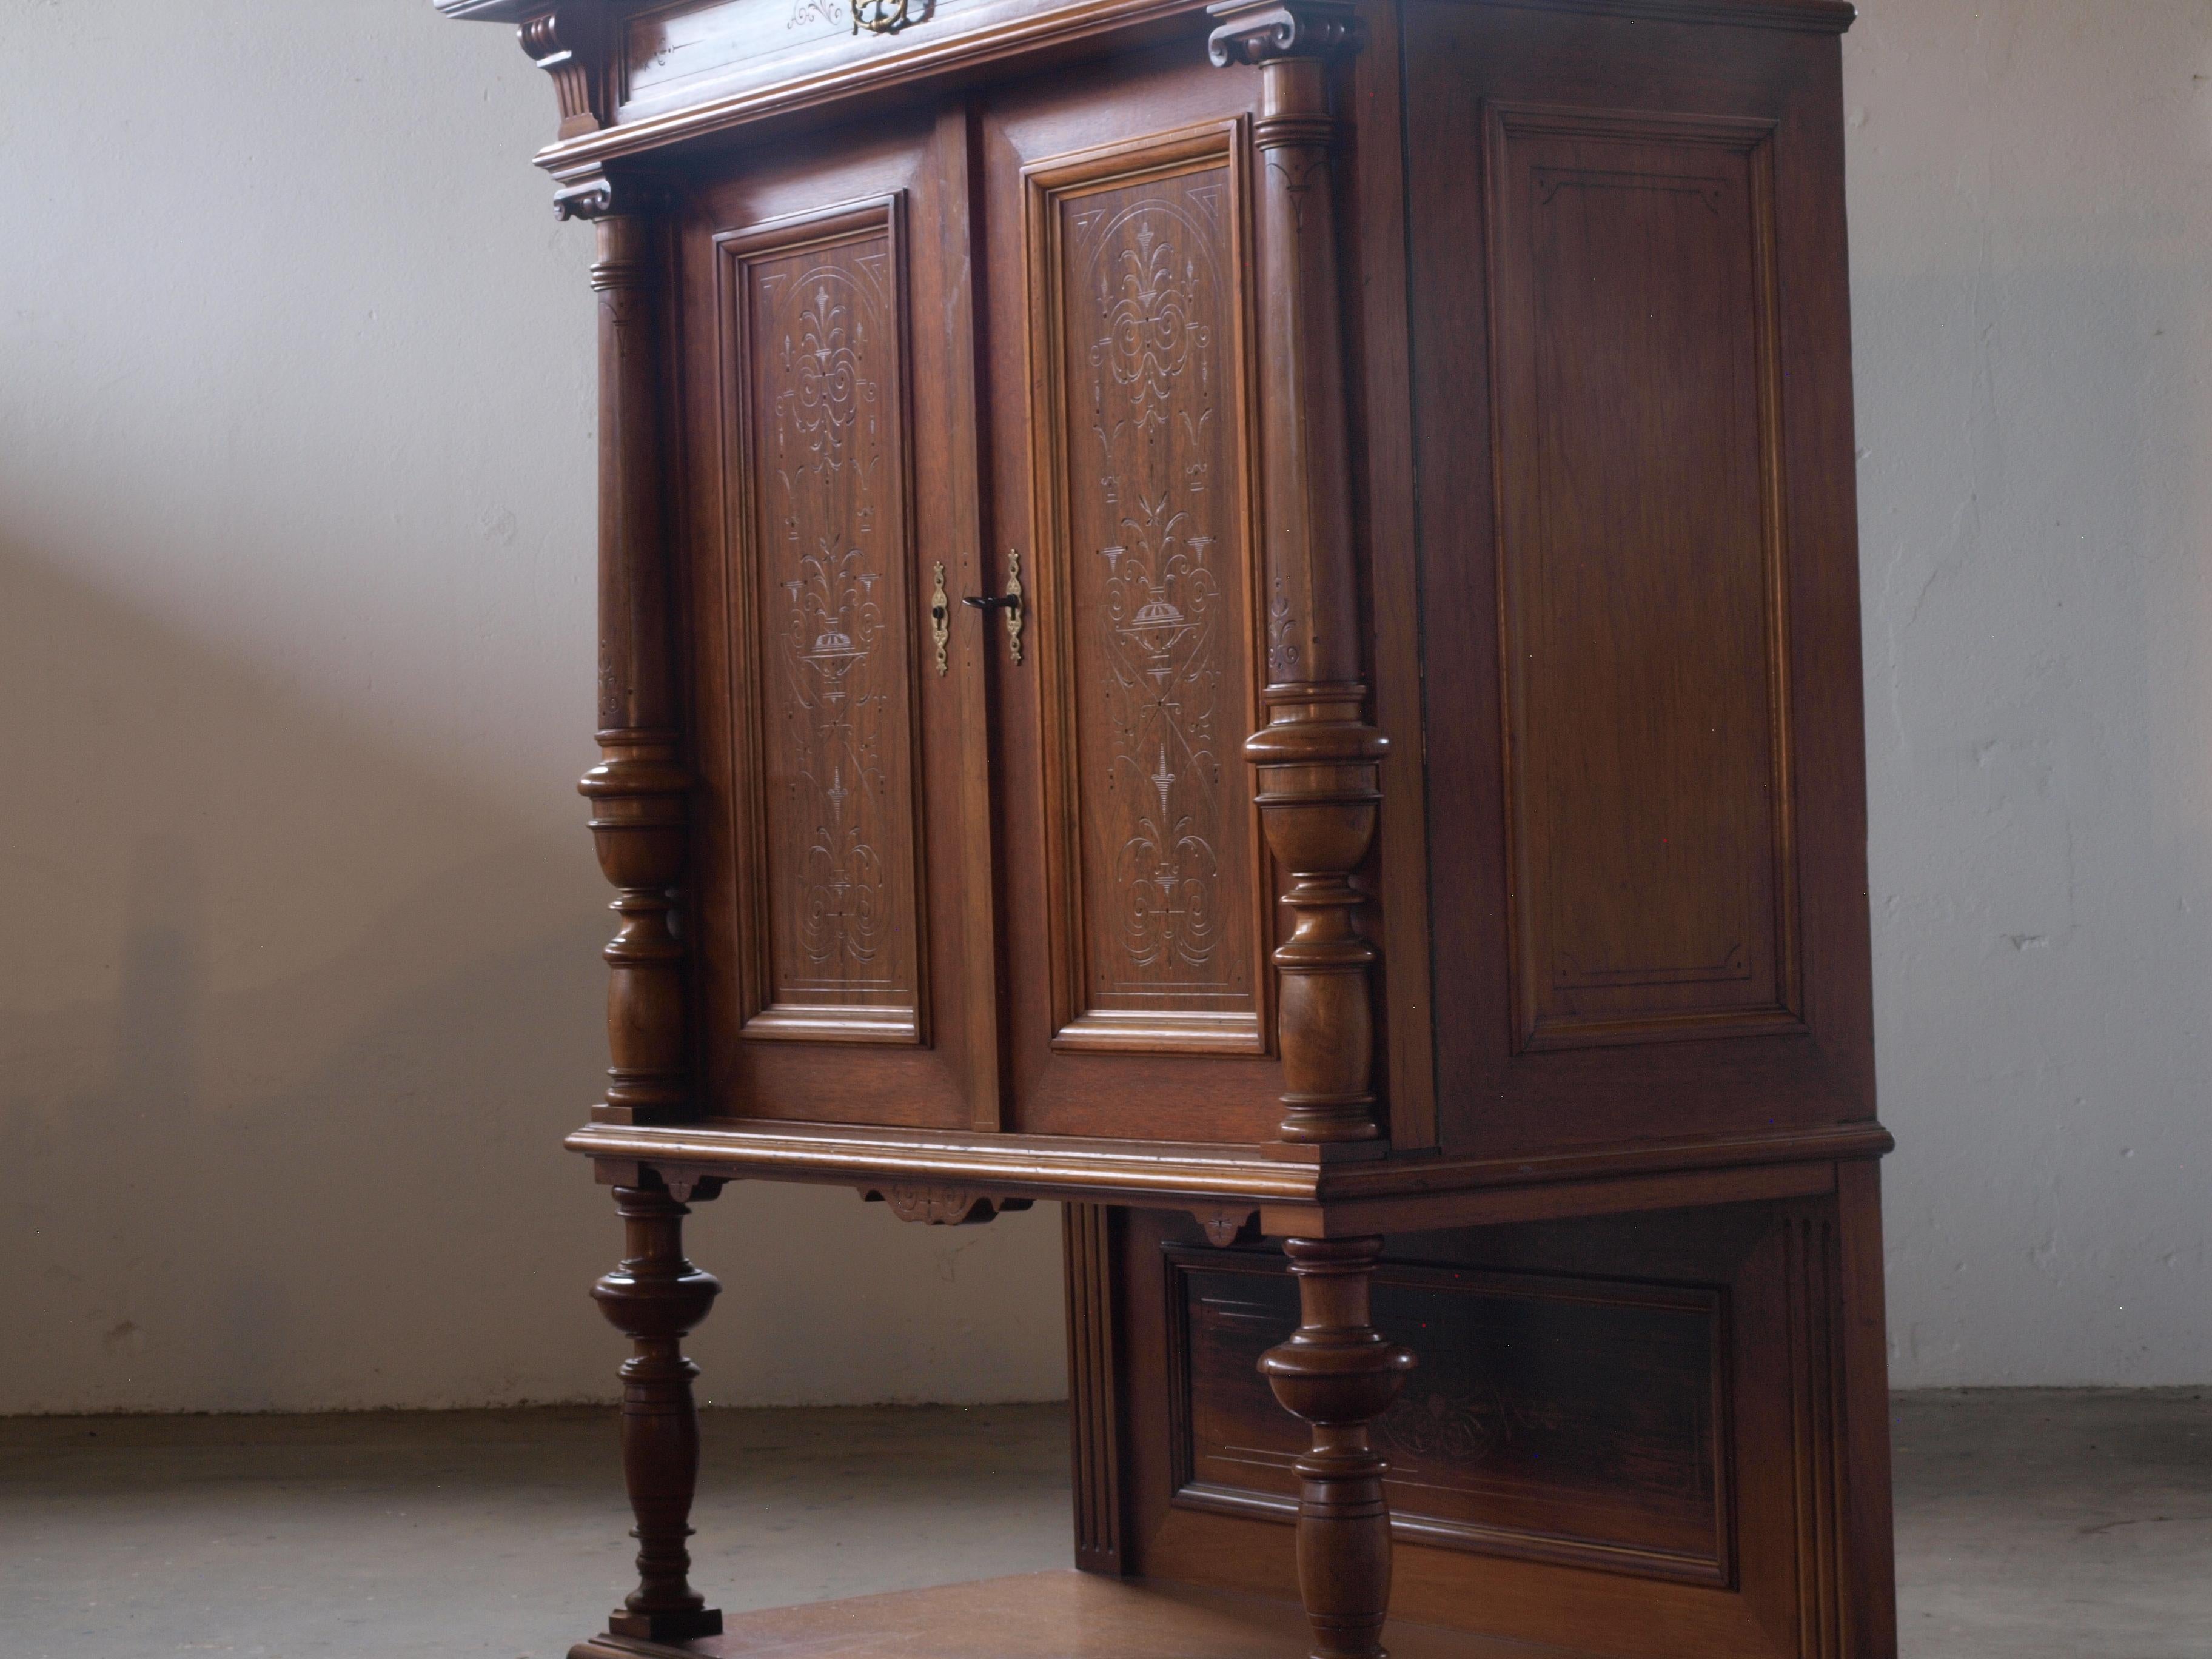 This wood cabinet, adorned with intricate carvings, is a splendid antique piece from the late 1800s to early 1900s in Denmark. Its country-side origin adds a rustic charm, creating a striking contrast to modern design classics.

The functional key